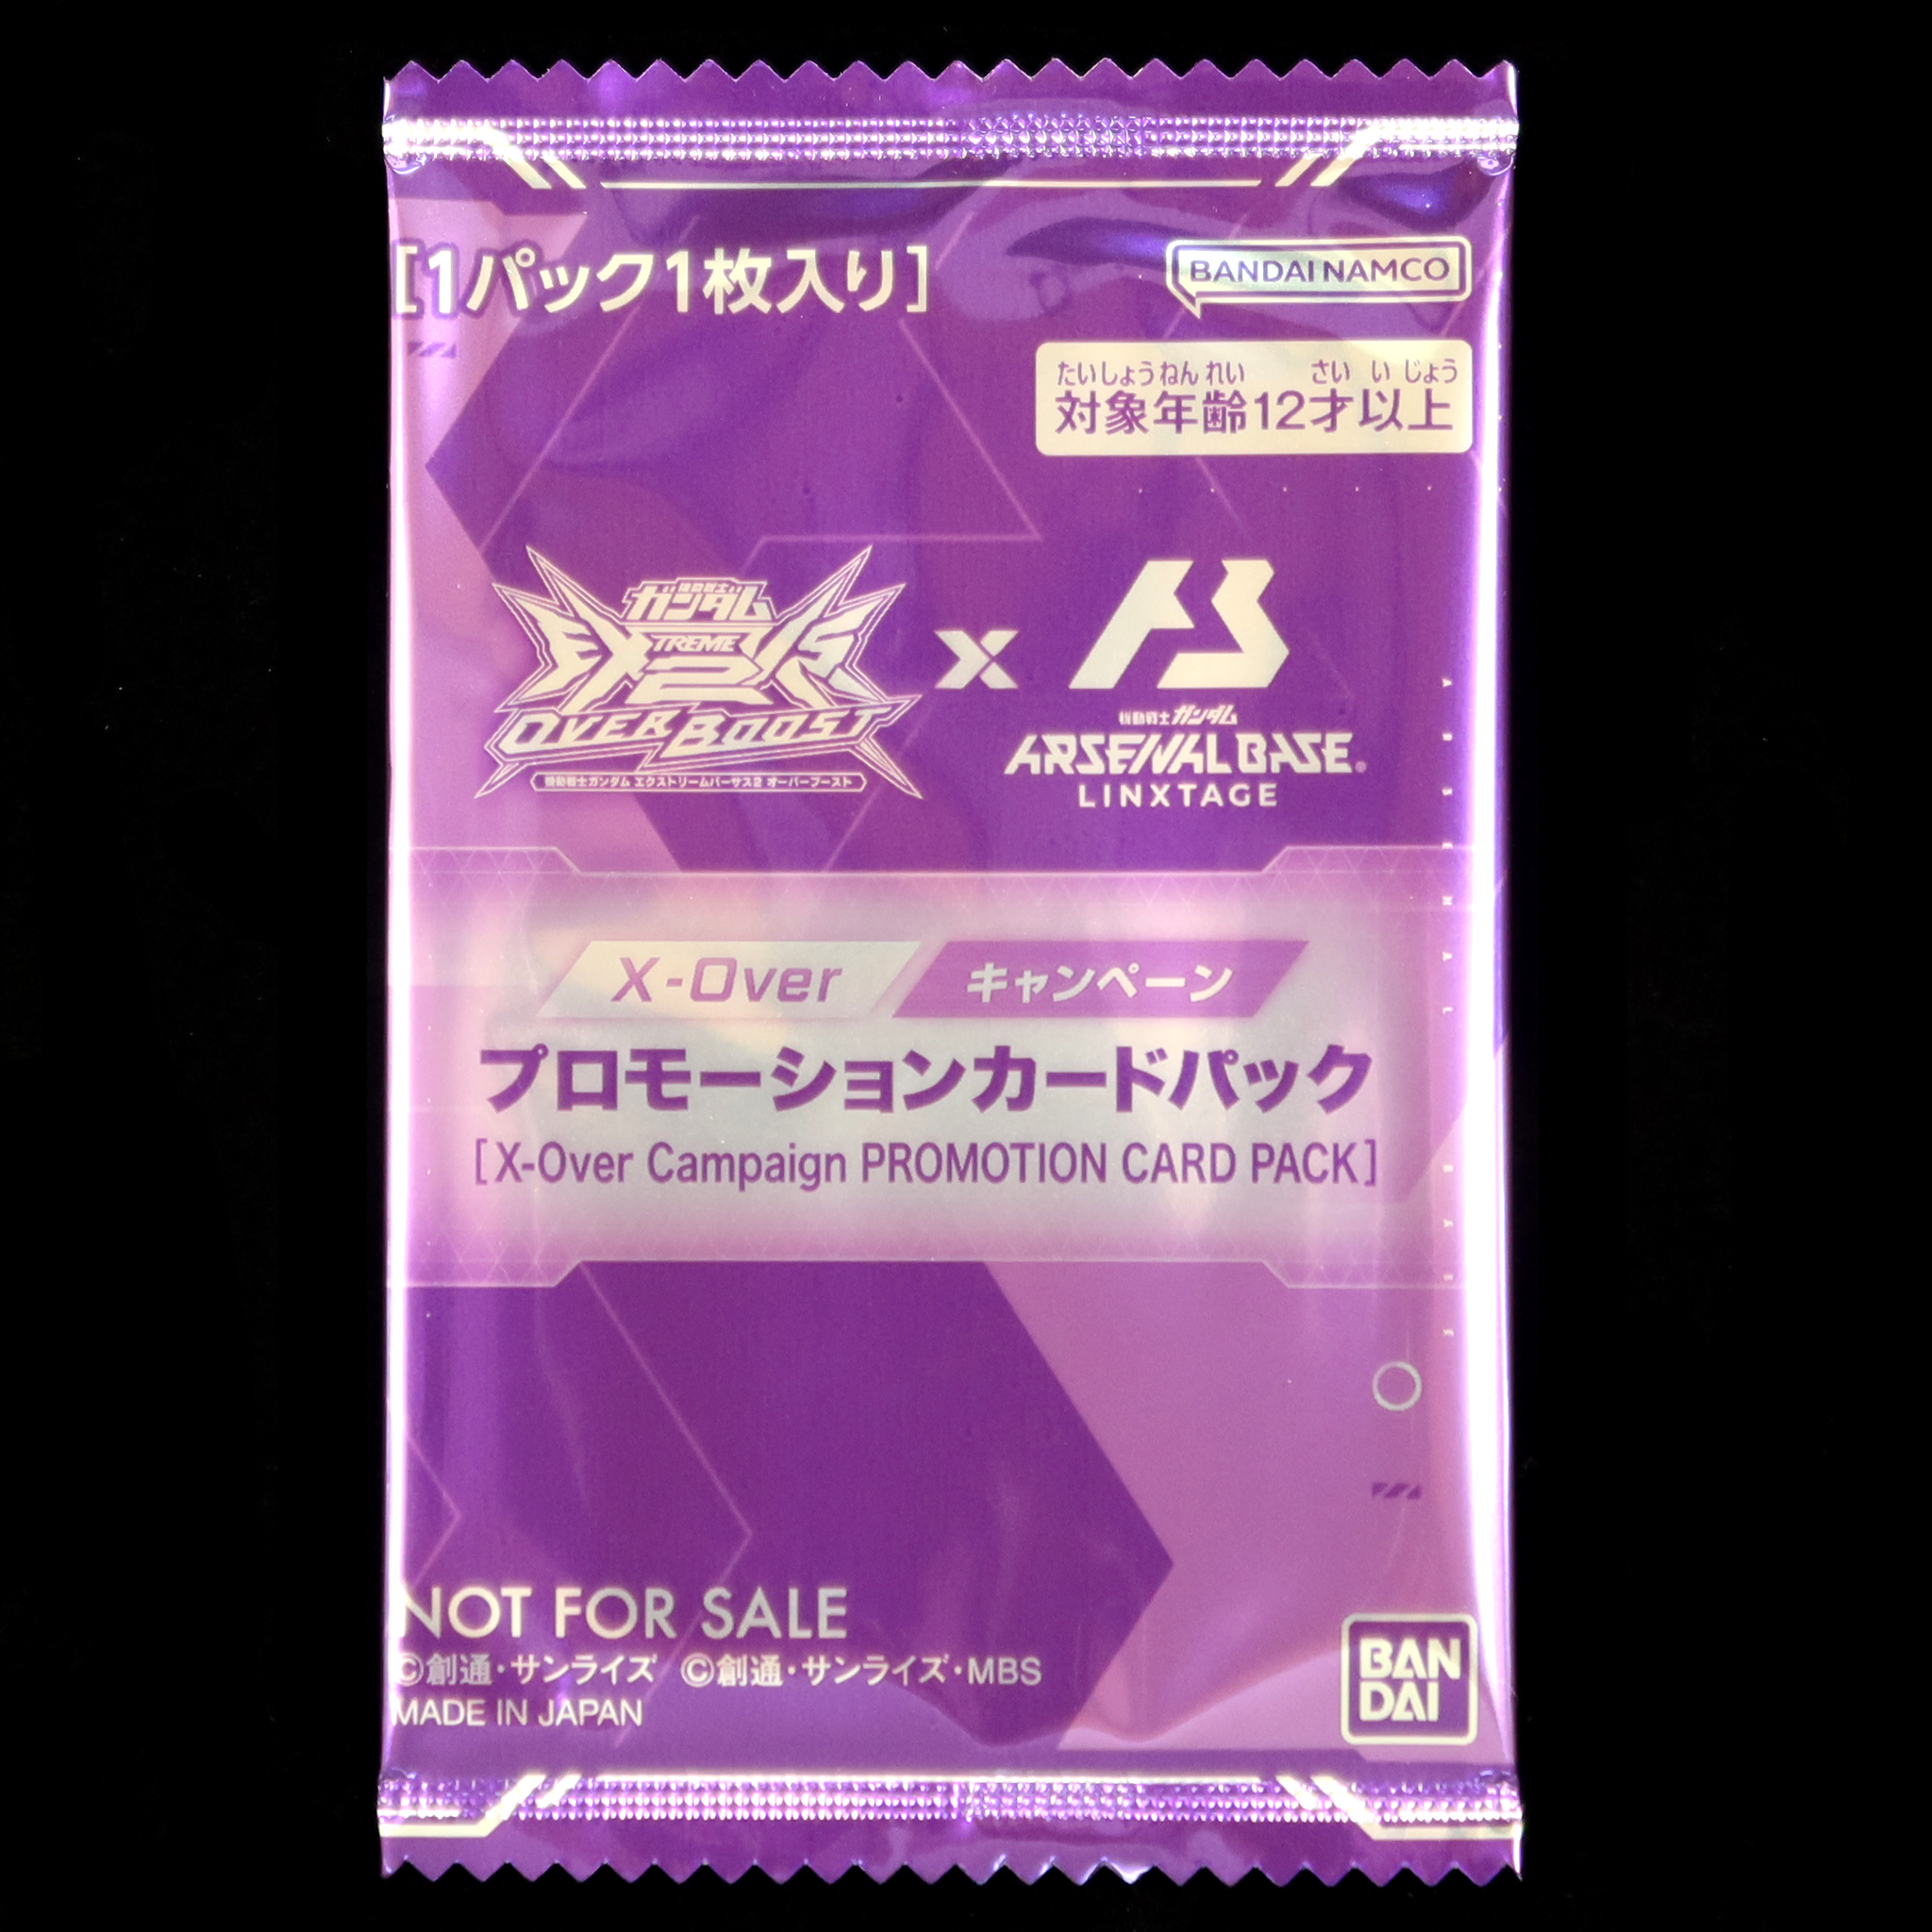 GUNDAM ARSENAL BASE LINXTAGE [X-Over Campaign PROMOTION CARD PACK]